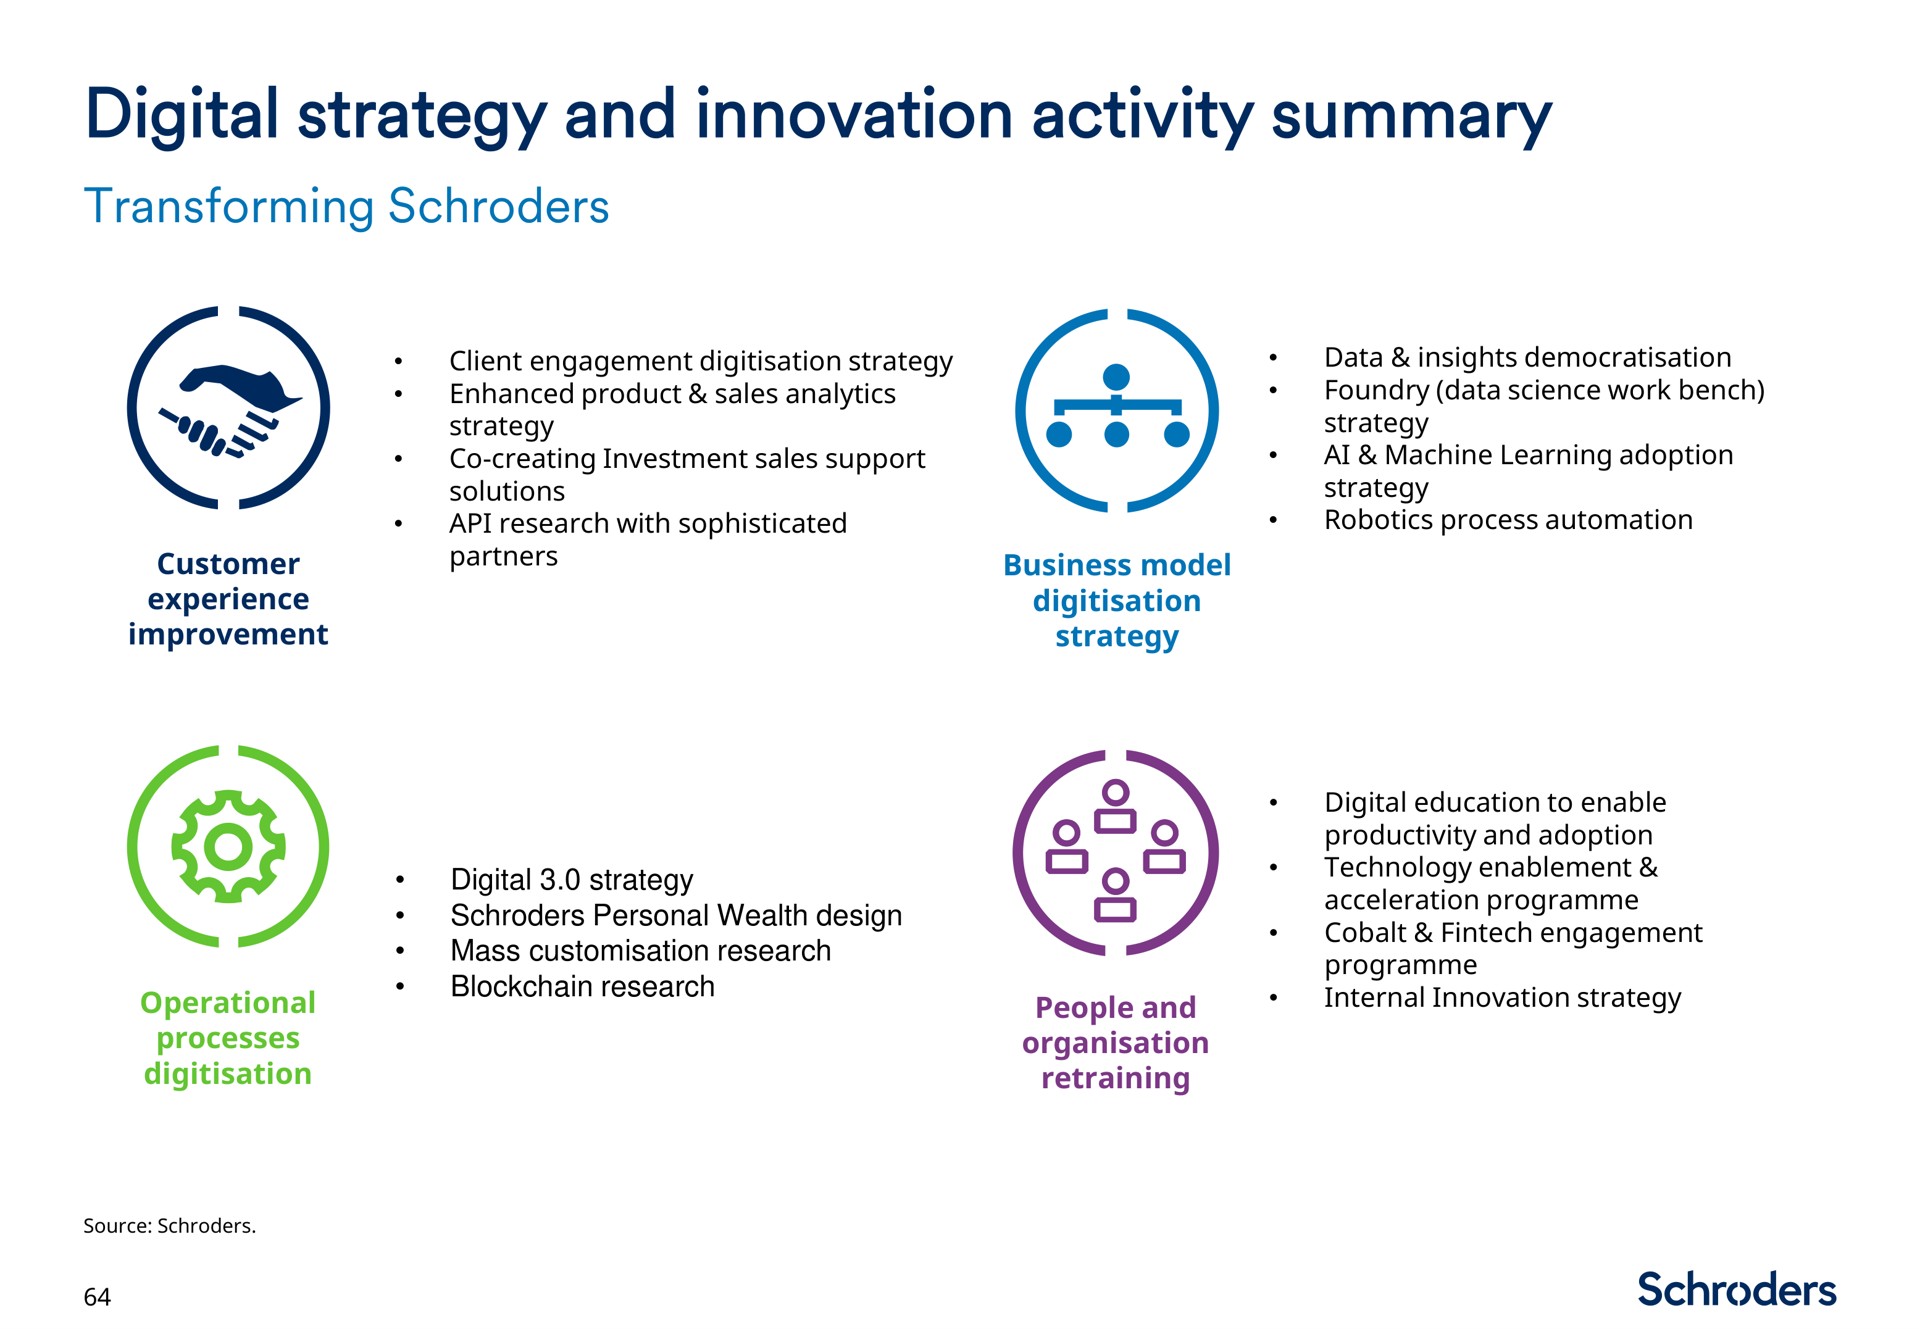 digital strategy and innovation activity summary | Schroders